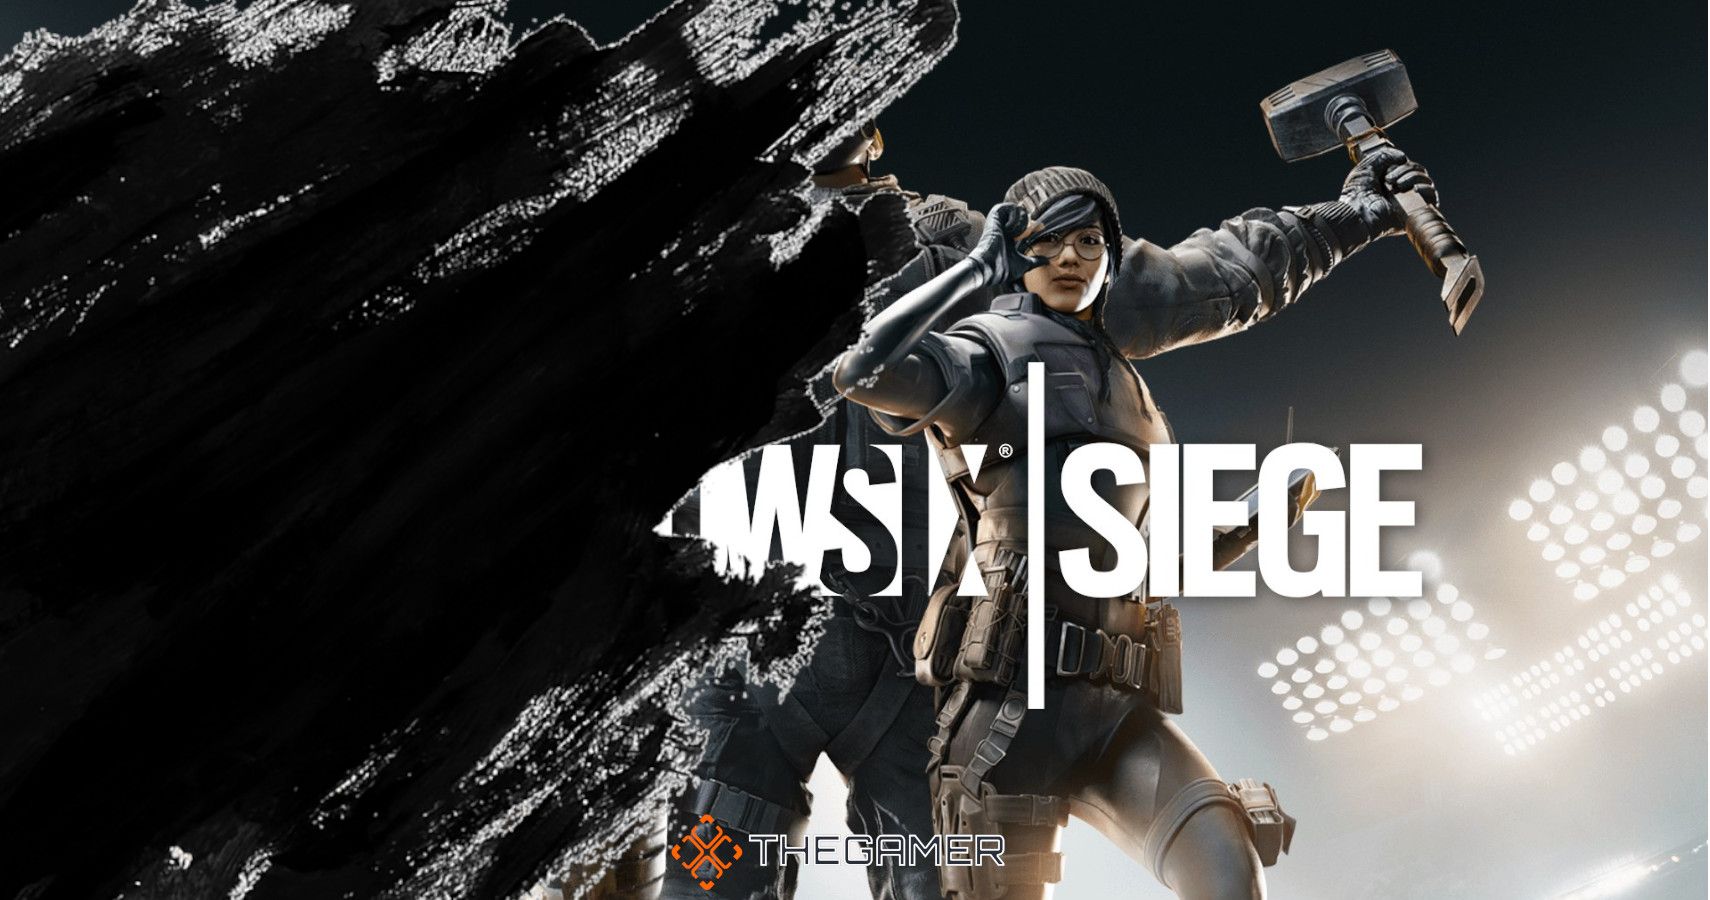 the siege logo and operators with a black paint spatter coming in from the side and covering half the image